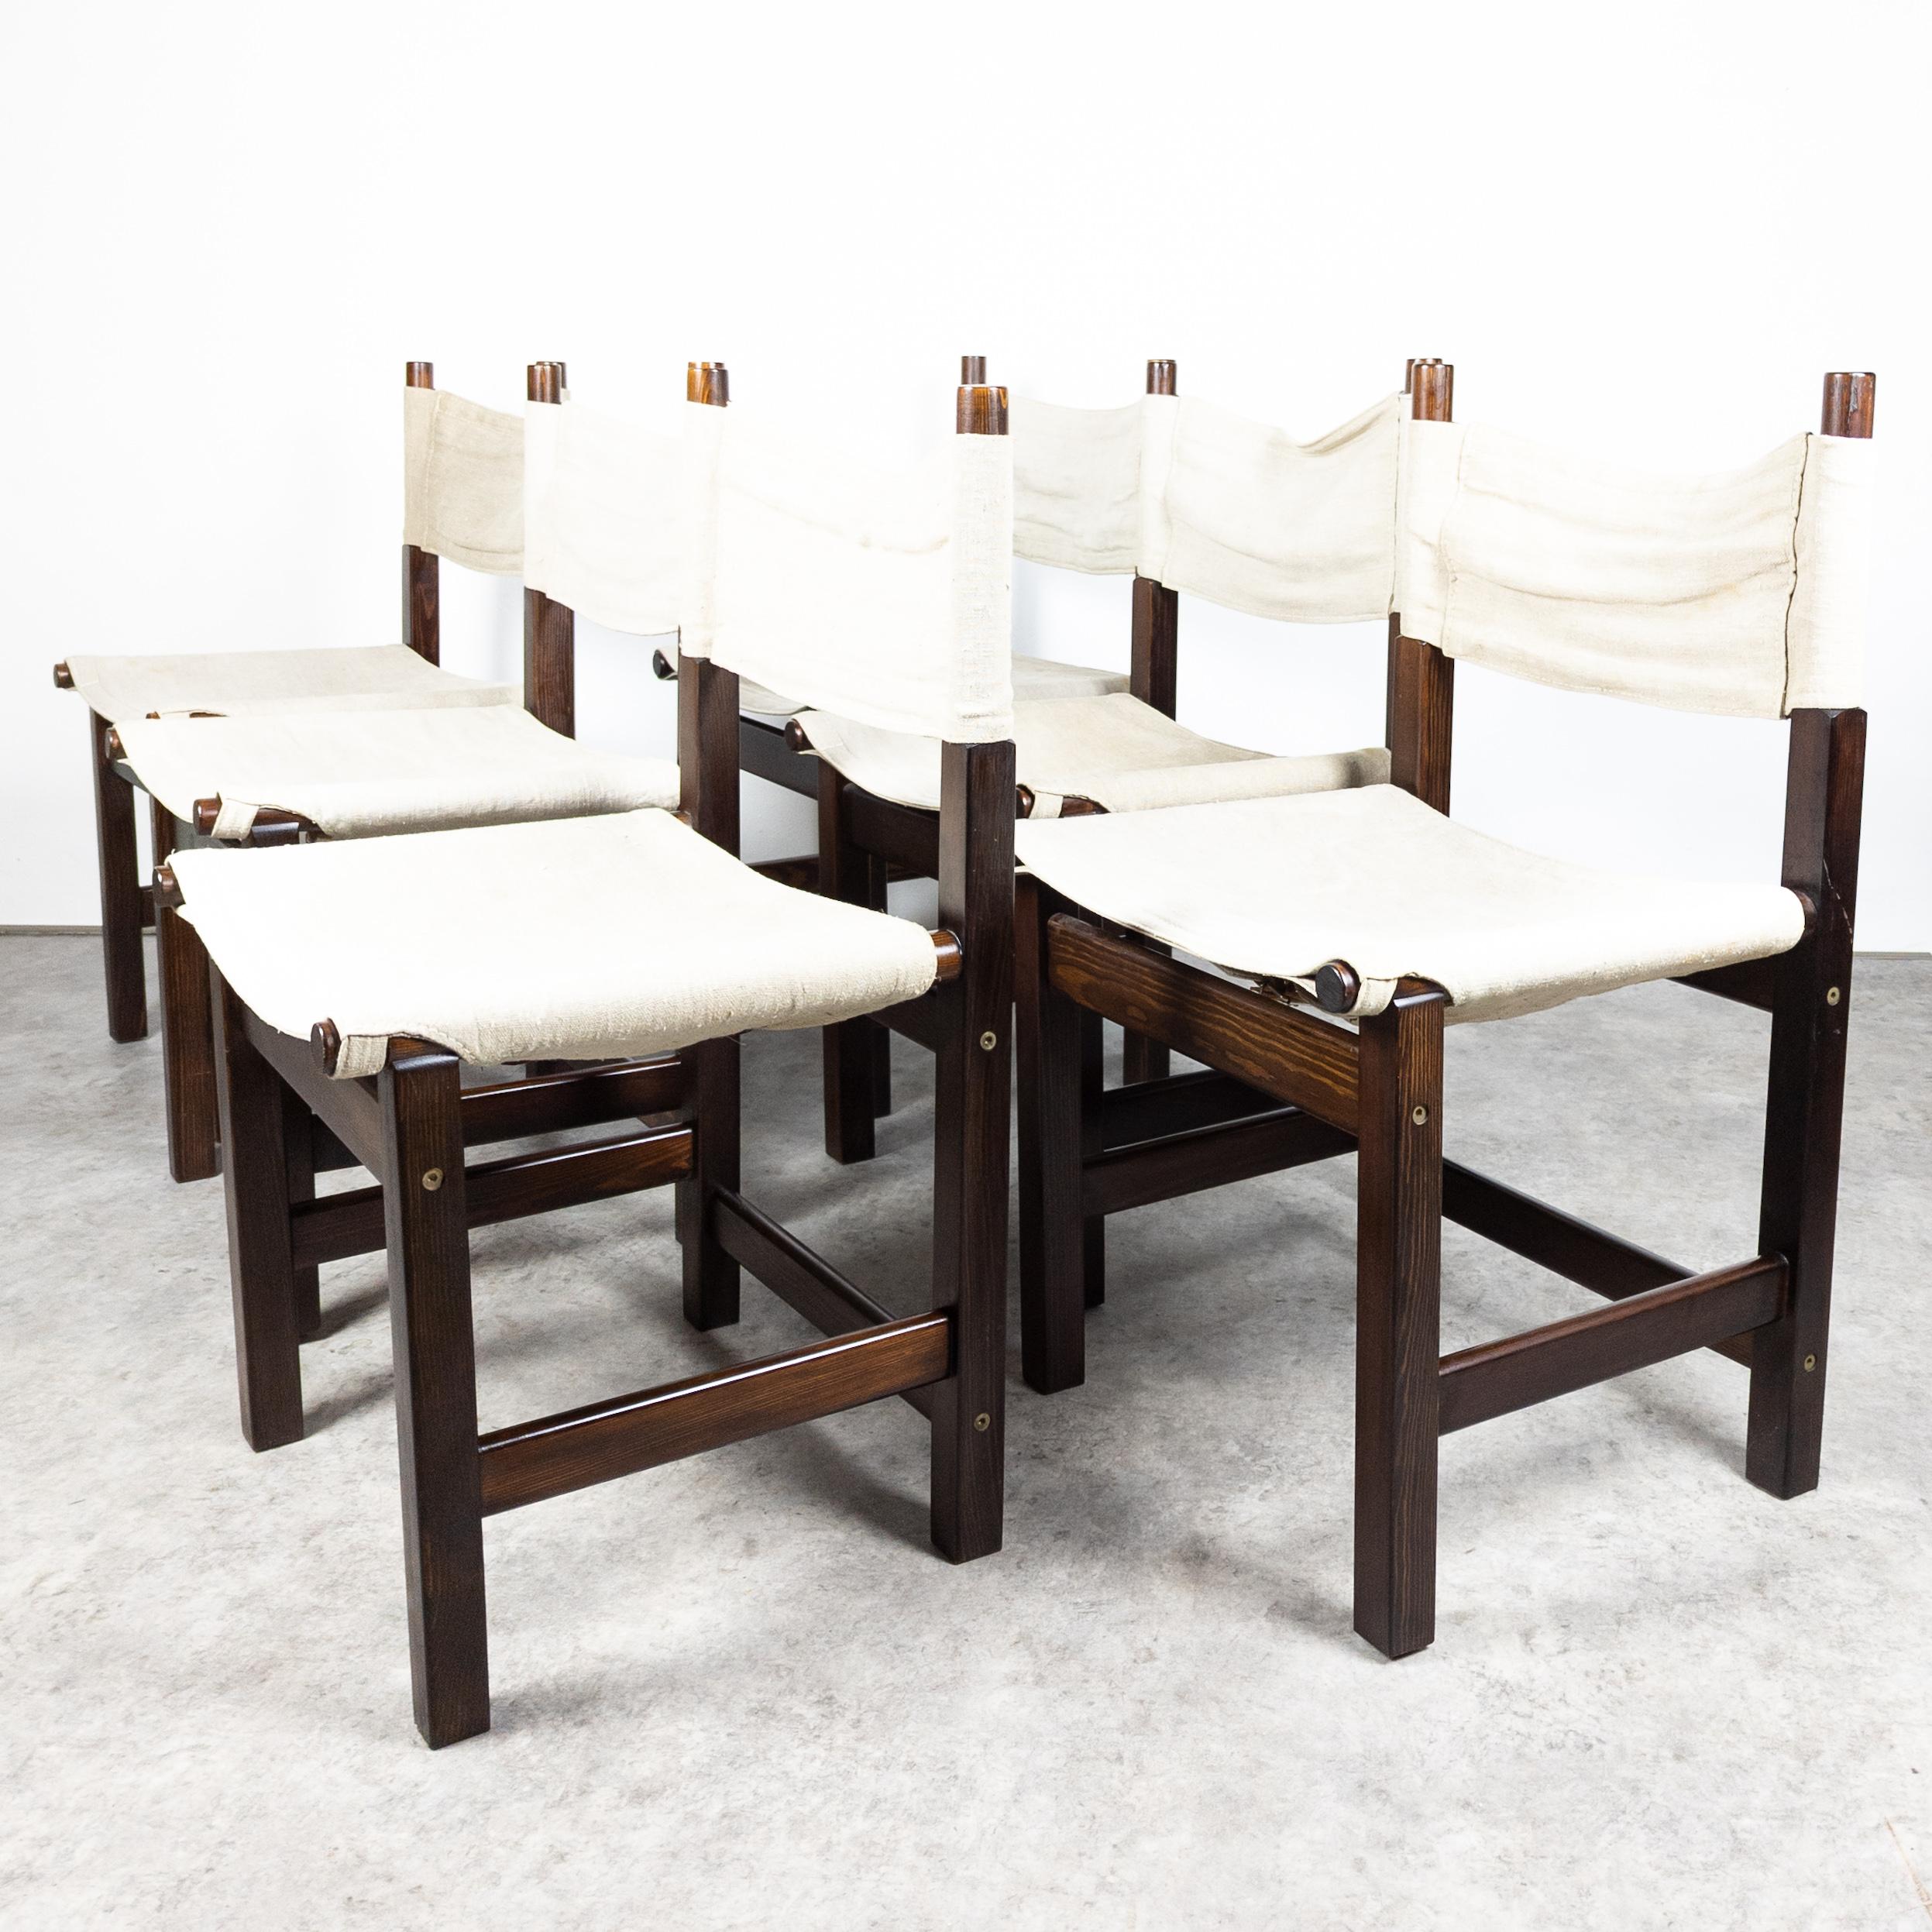 Simple and timeless pieces designed by Tomas Jelinek for Ikea in 1980. This unique chairs were in production for a short period of time only and are hard to find. Made of solid mahagony varnished pine wood and canvas. Chairs are in good vintage